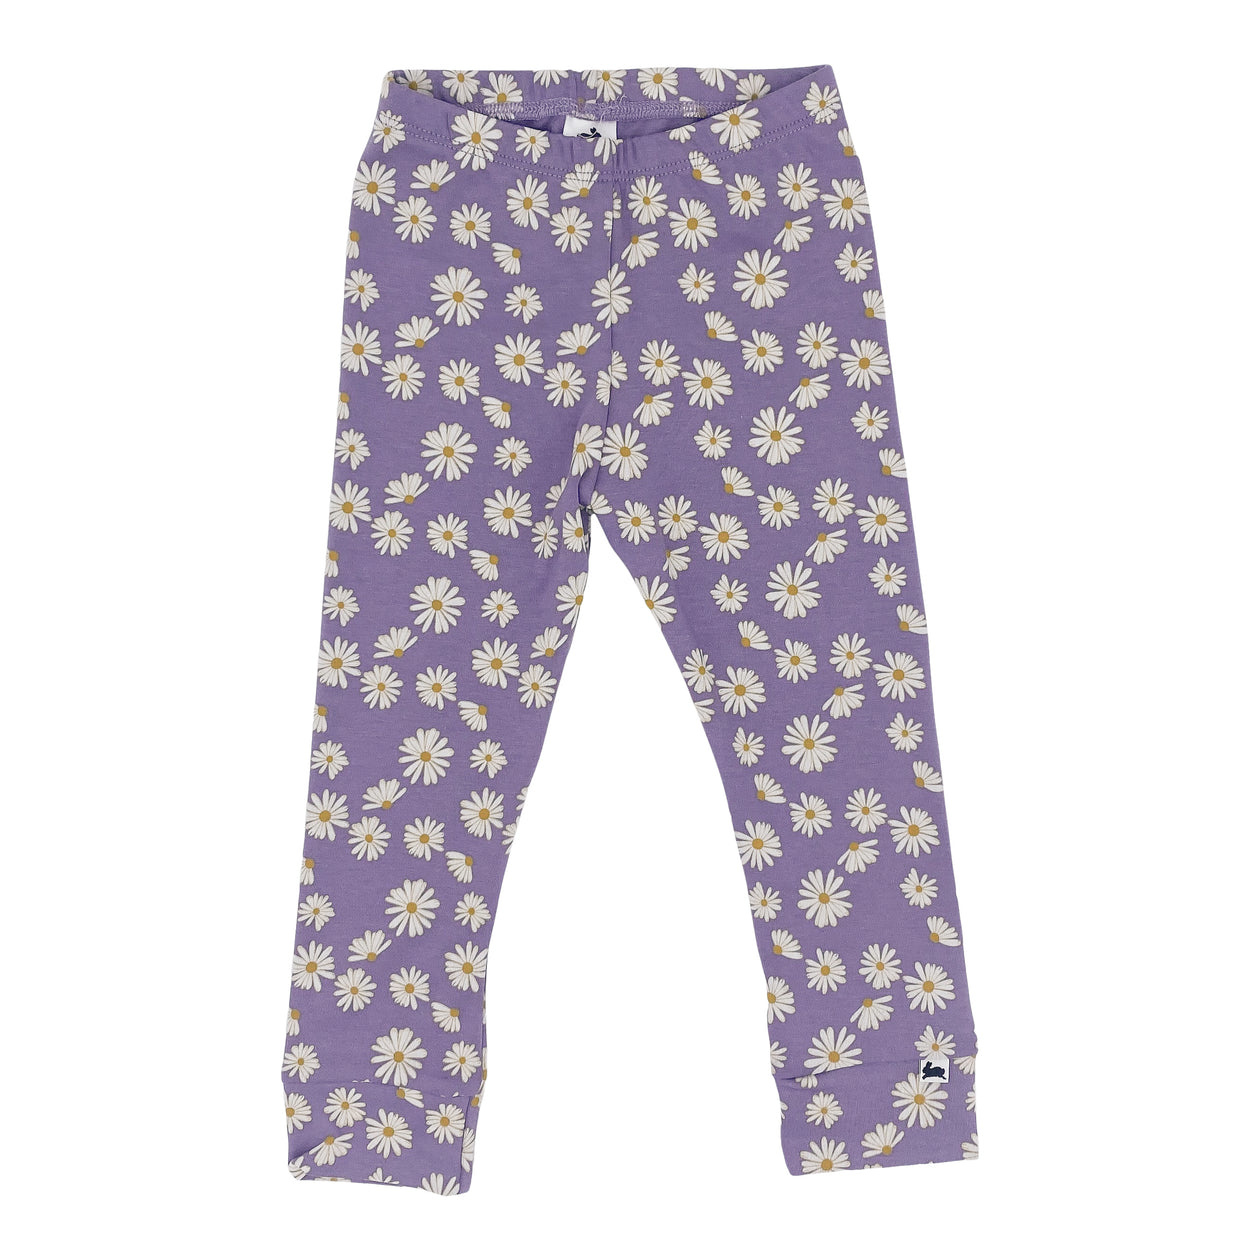 Little & Lively Bamboo/Cotton Leggings: Flamingo - Lagoon Baby + Toy Shoppe  - Made in Canada Bamboo Leggings - Toddler Apparel Vancouver